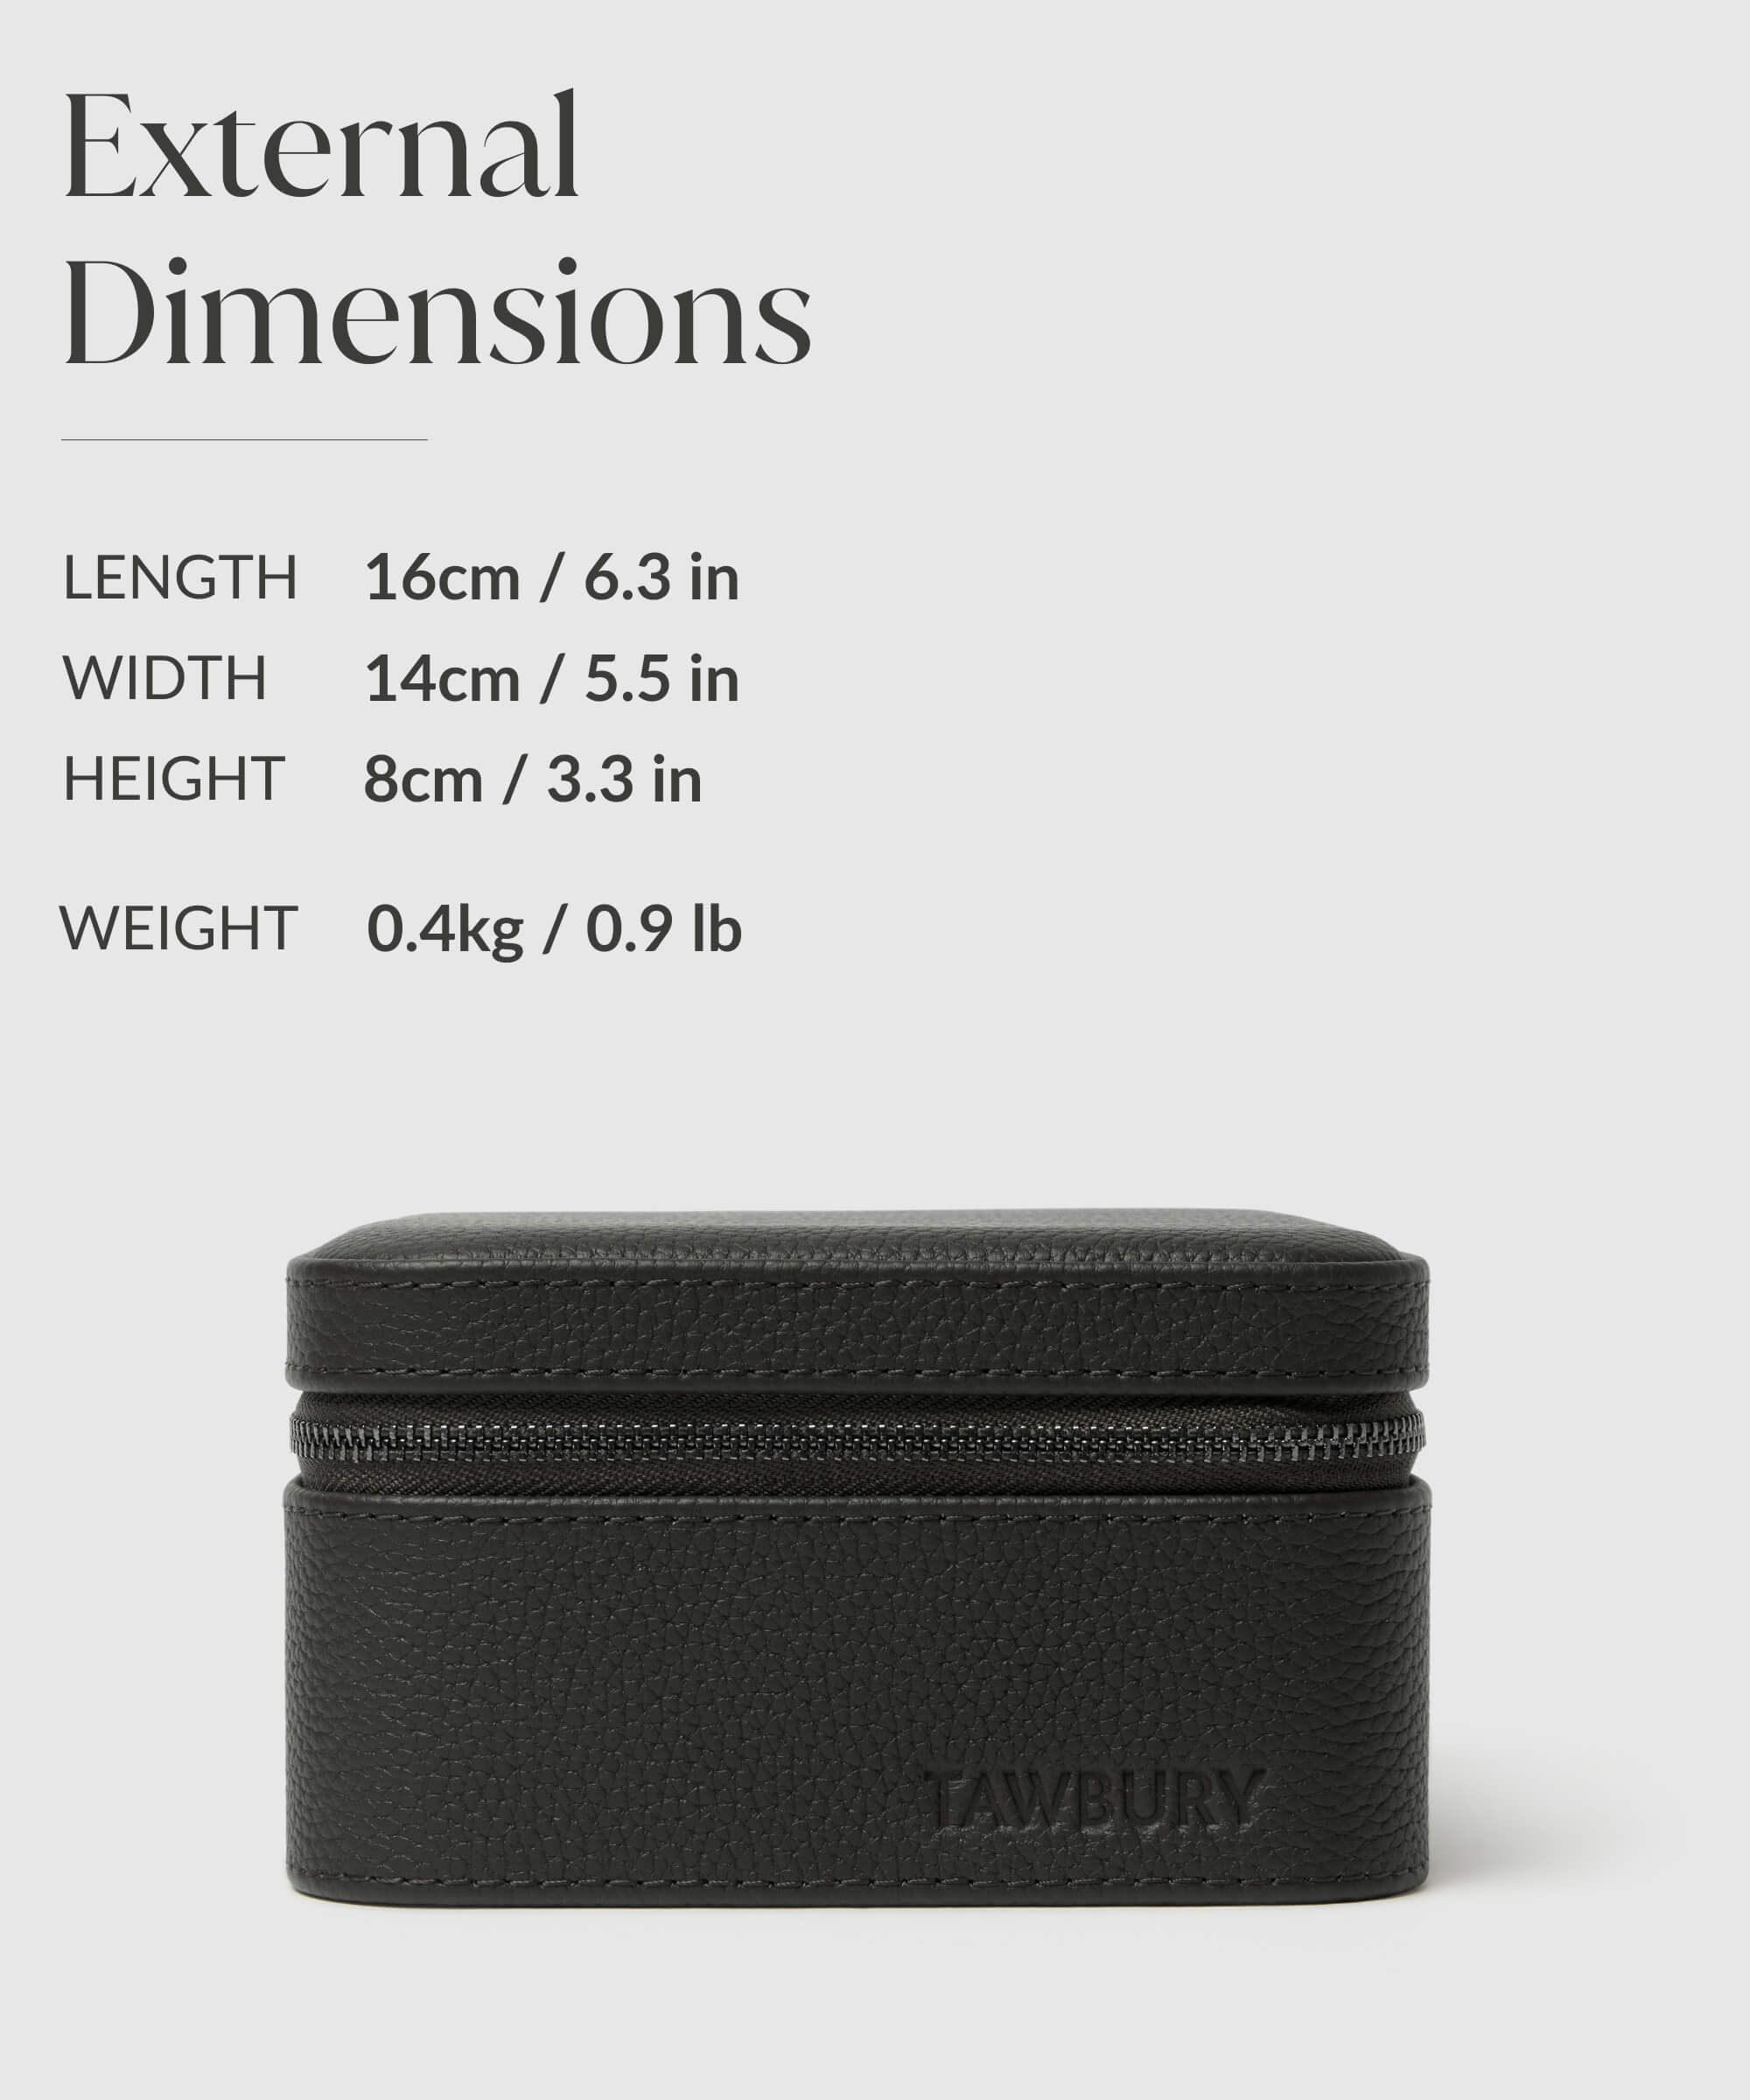 The external dimensions of a TAWBURY Fraser 2 Watch Travel Case with Storage - Black, designed for protection and perfect for a watch lover.